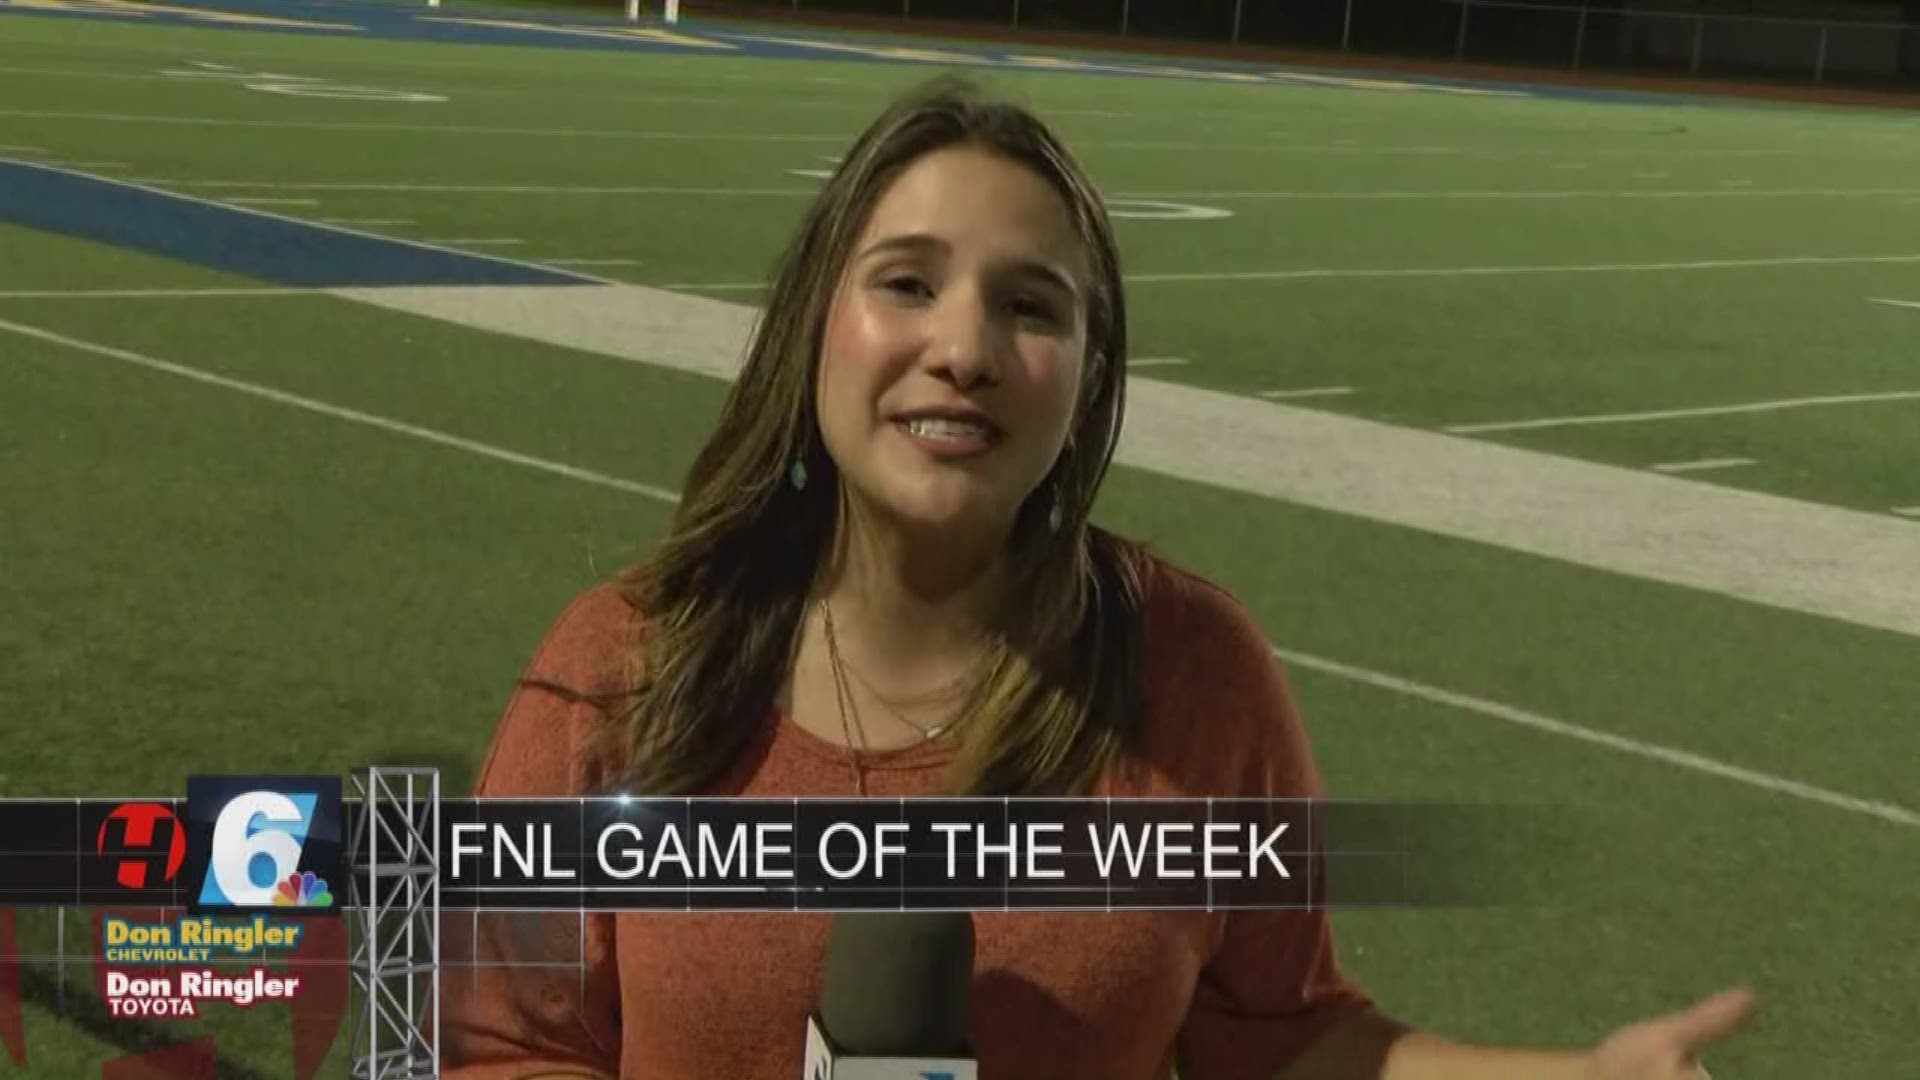 Channel 6 Sports Reporter Jessica Morrey wraps up the Game of the Week from Pirate Stadium.